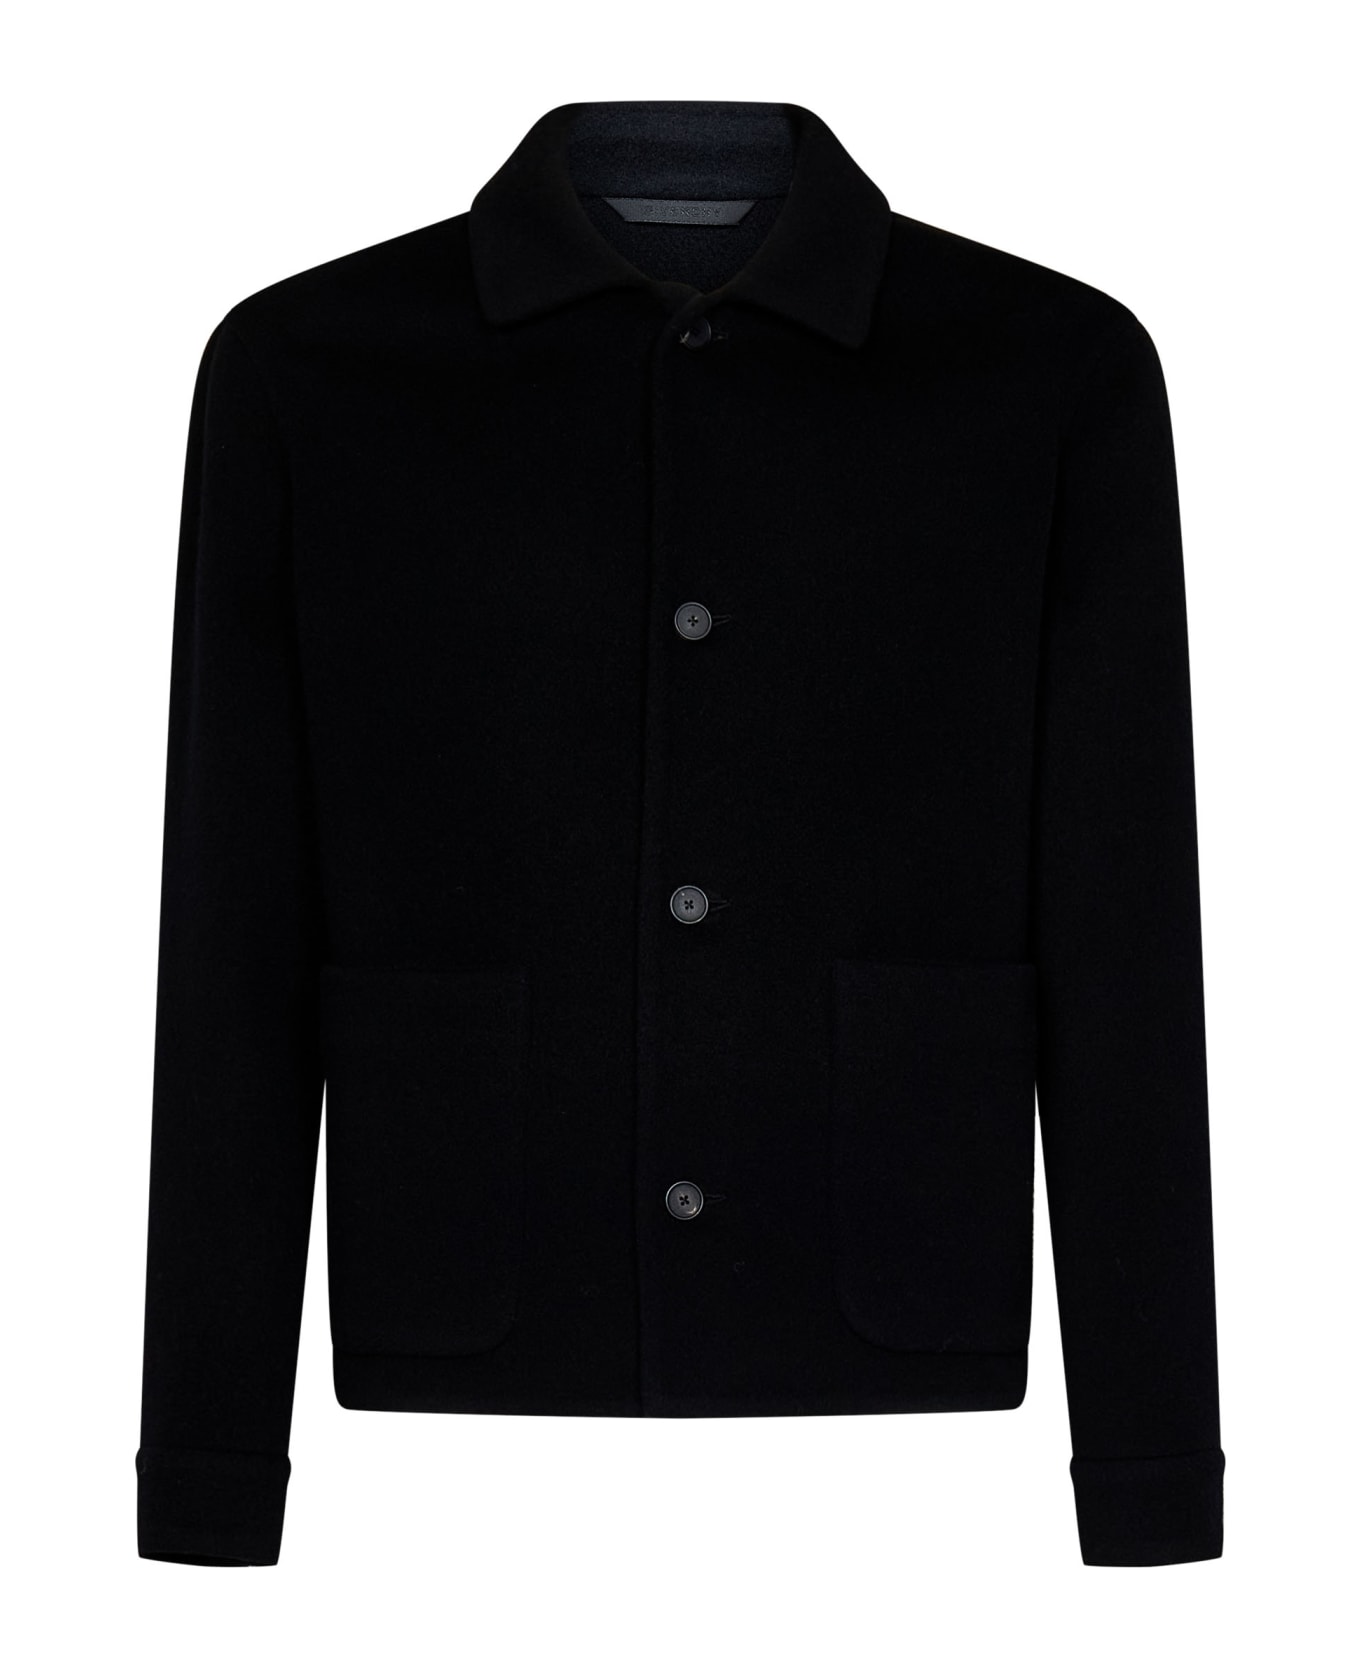 Givenchy Wool And Cashmere Jacket - black